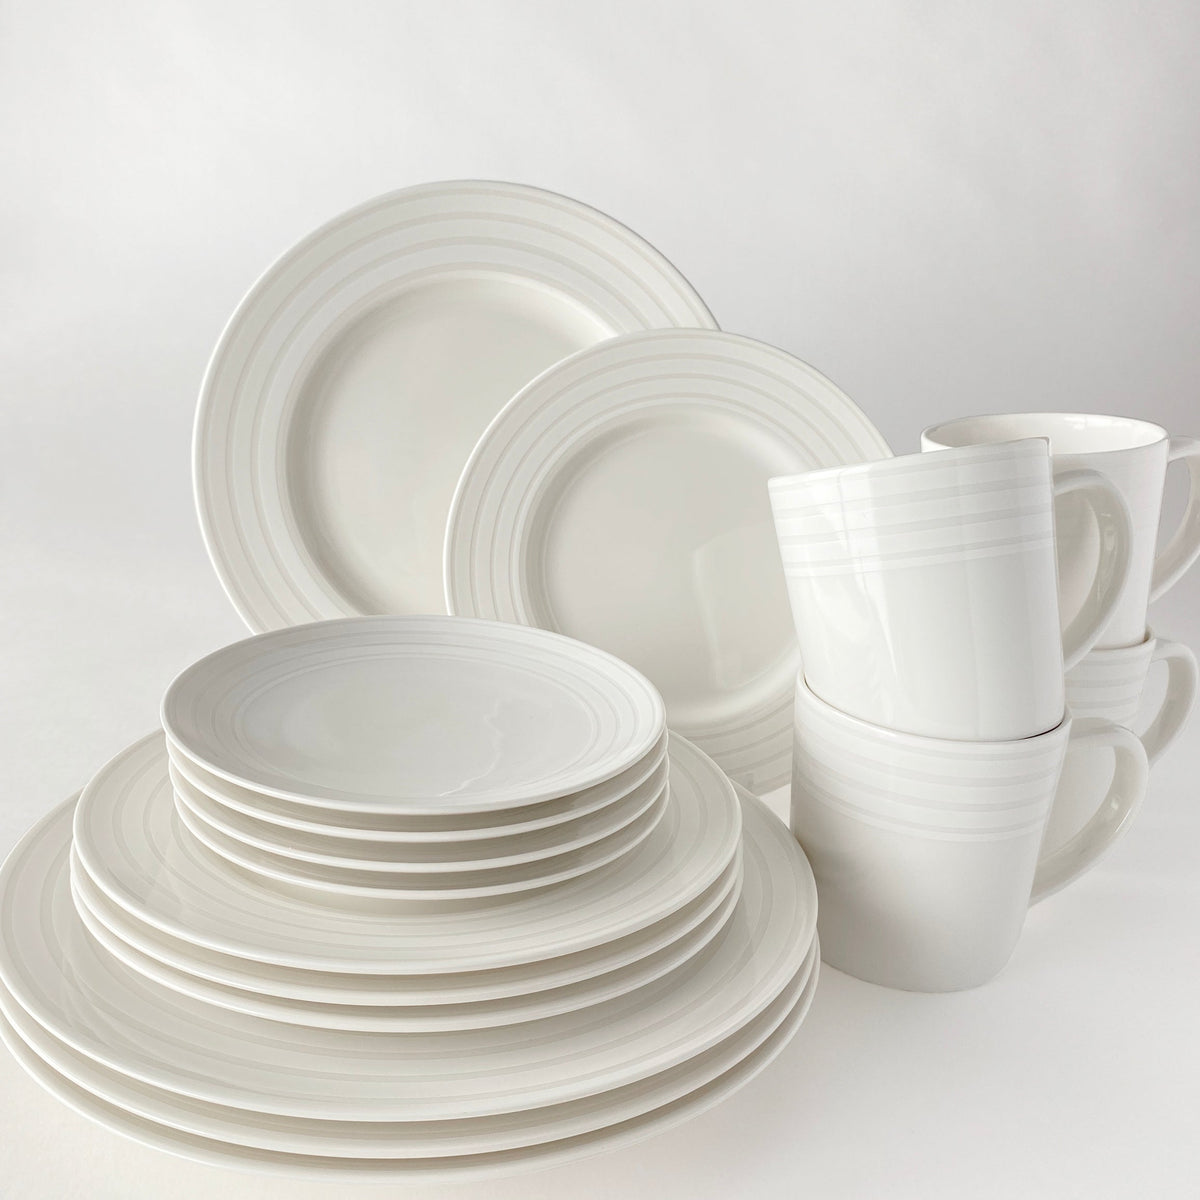 A set of white ceramic dinnerware, including Caskata Artisanal Home Cambridge Stripe Small Plates, bowls, and mugs with a subtle Cambridge Stripe pattern, arranged neatly against a plain background.